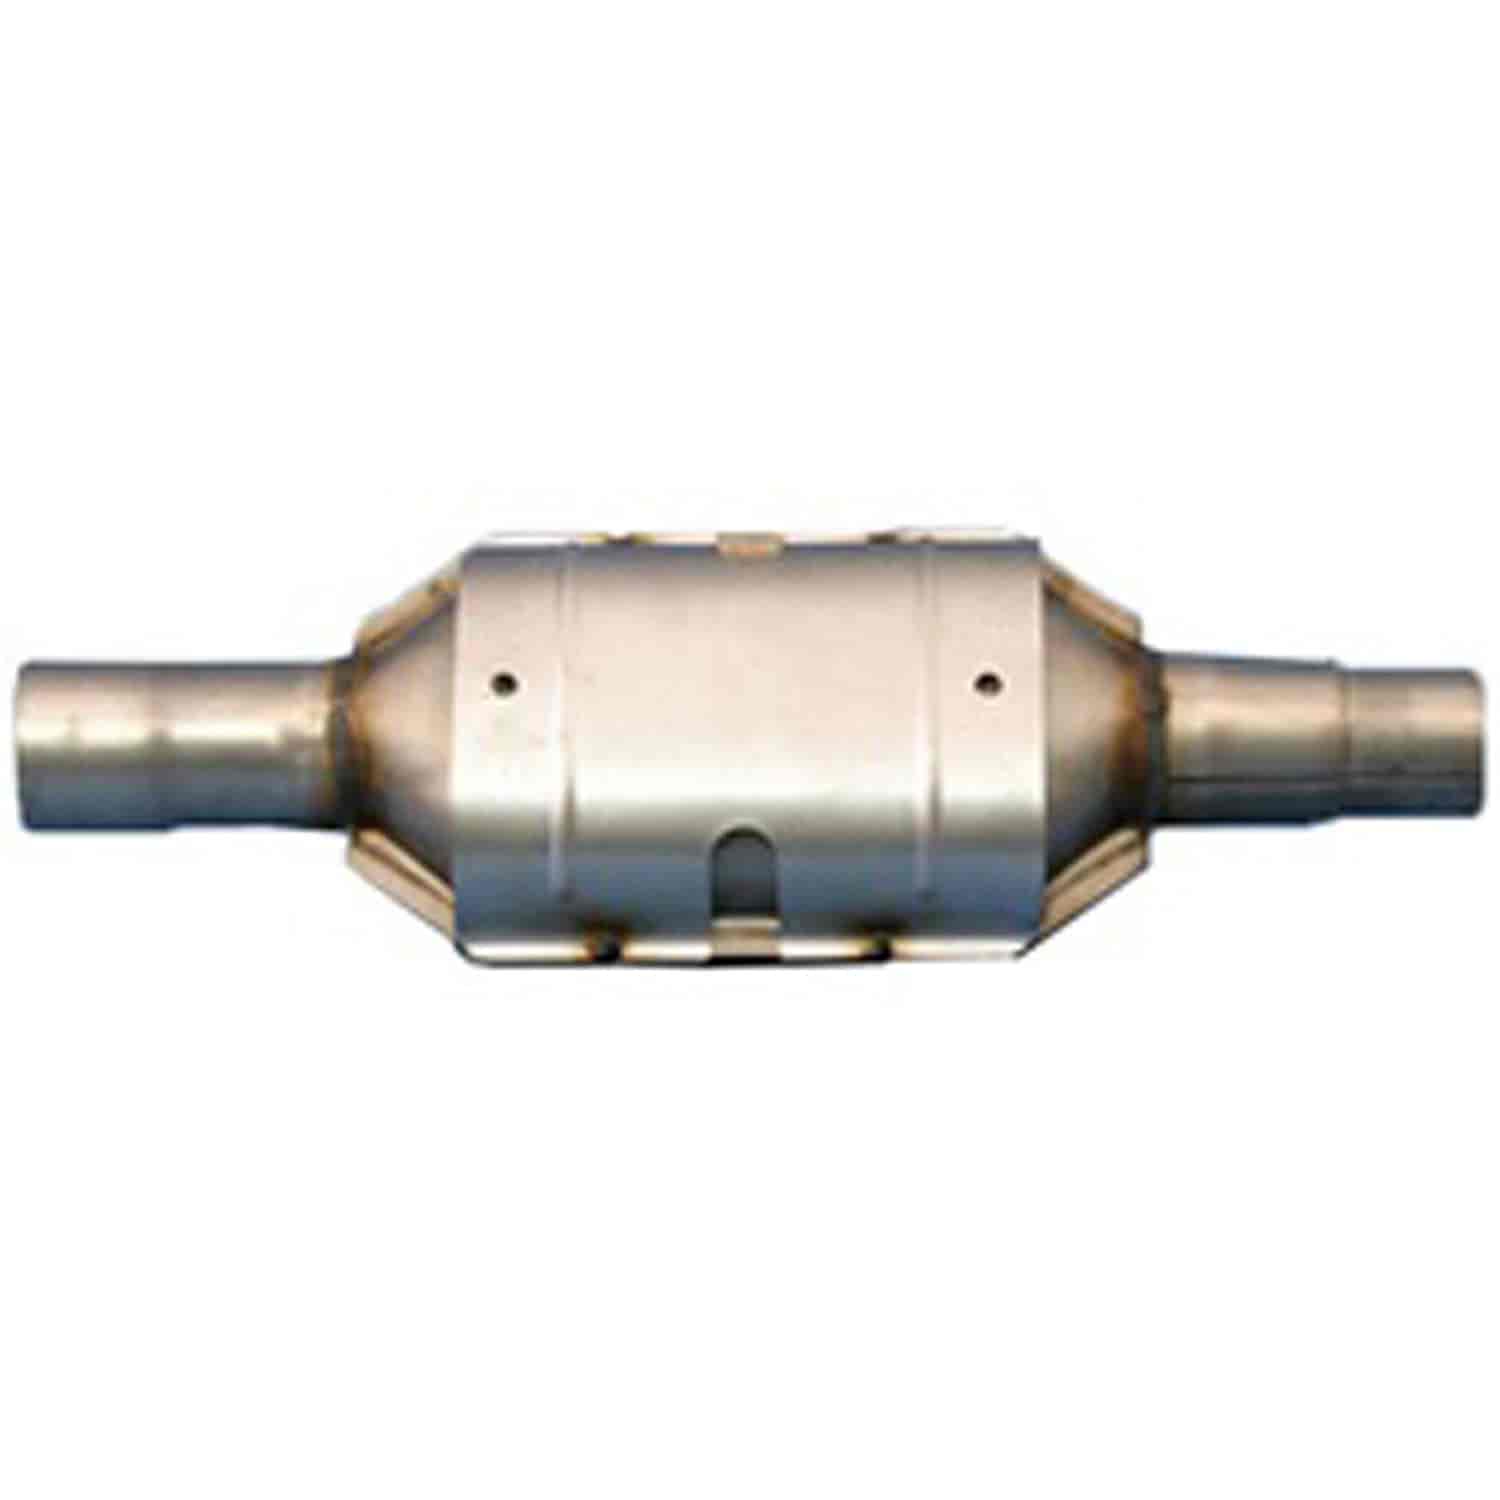 Replacement catalytic converter from Omix-ADA, Fits 94-95 Jeep Grand Cherokee ZJ with a 5.2 liter engine.